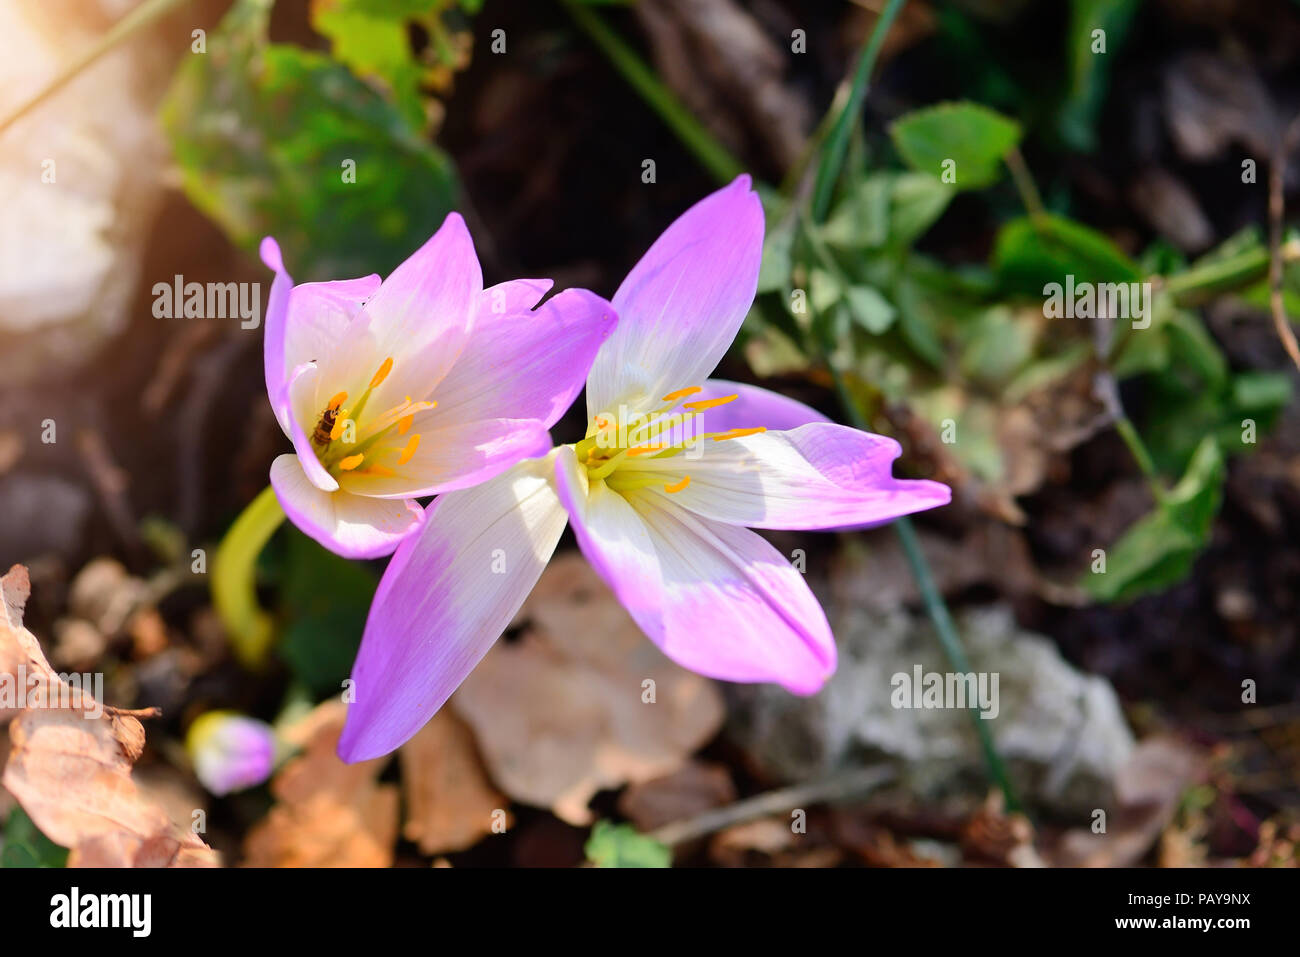 Nice dewy flowers in the autumn (Colchicum autumnale) Stock Photo